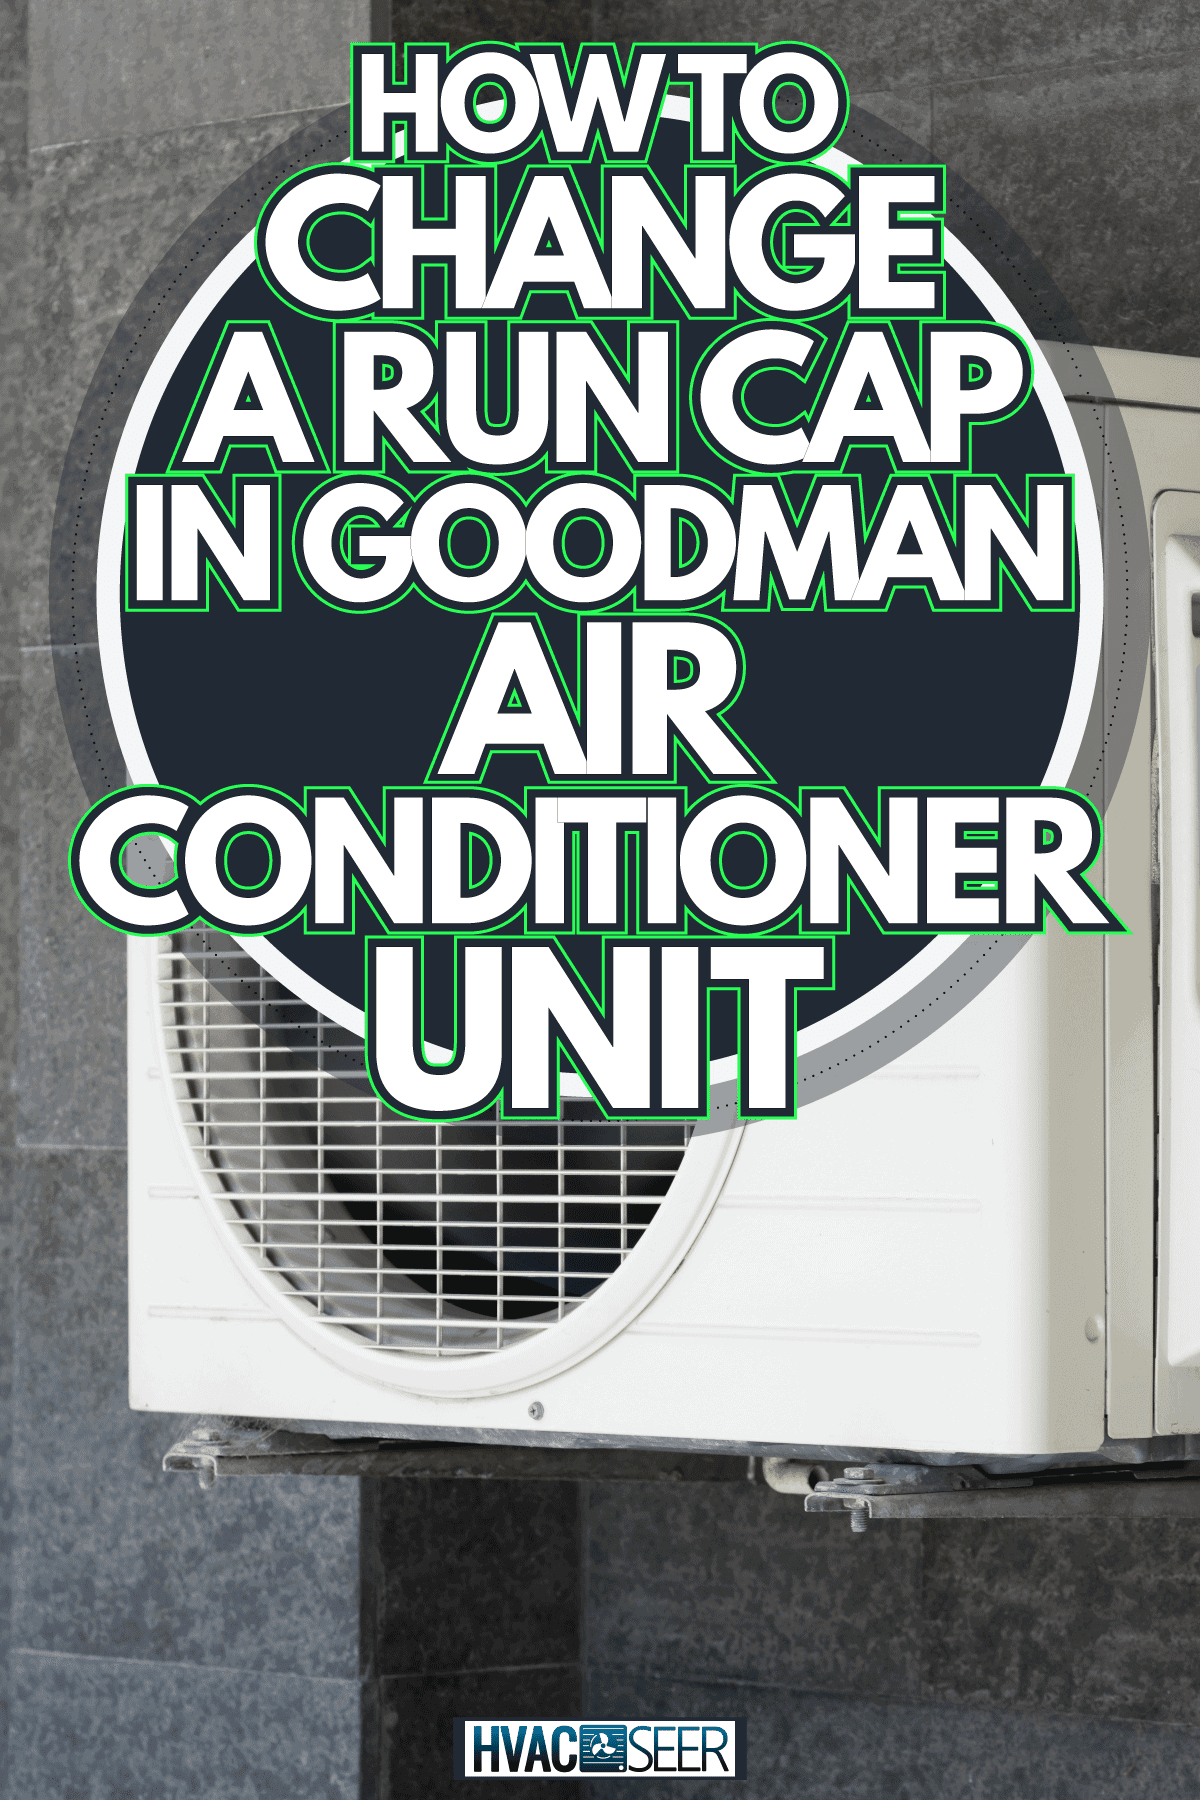 Air conditioner unit and its most common culprits of an issue, How to Change A Run Cap In Goodman Air Conditioner Unit